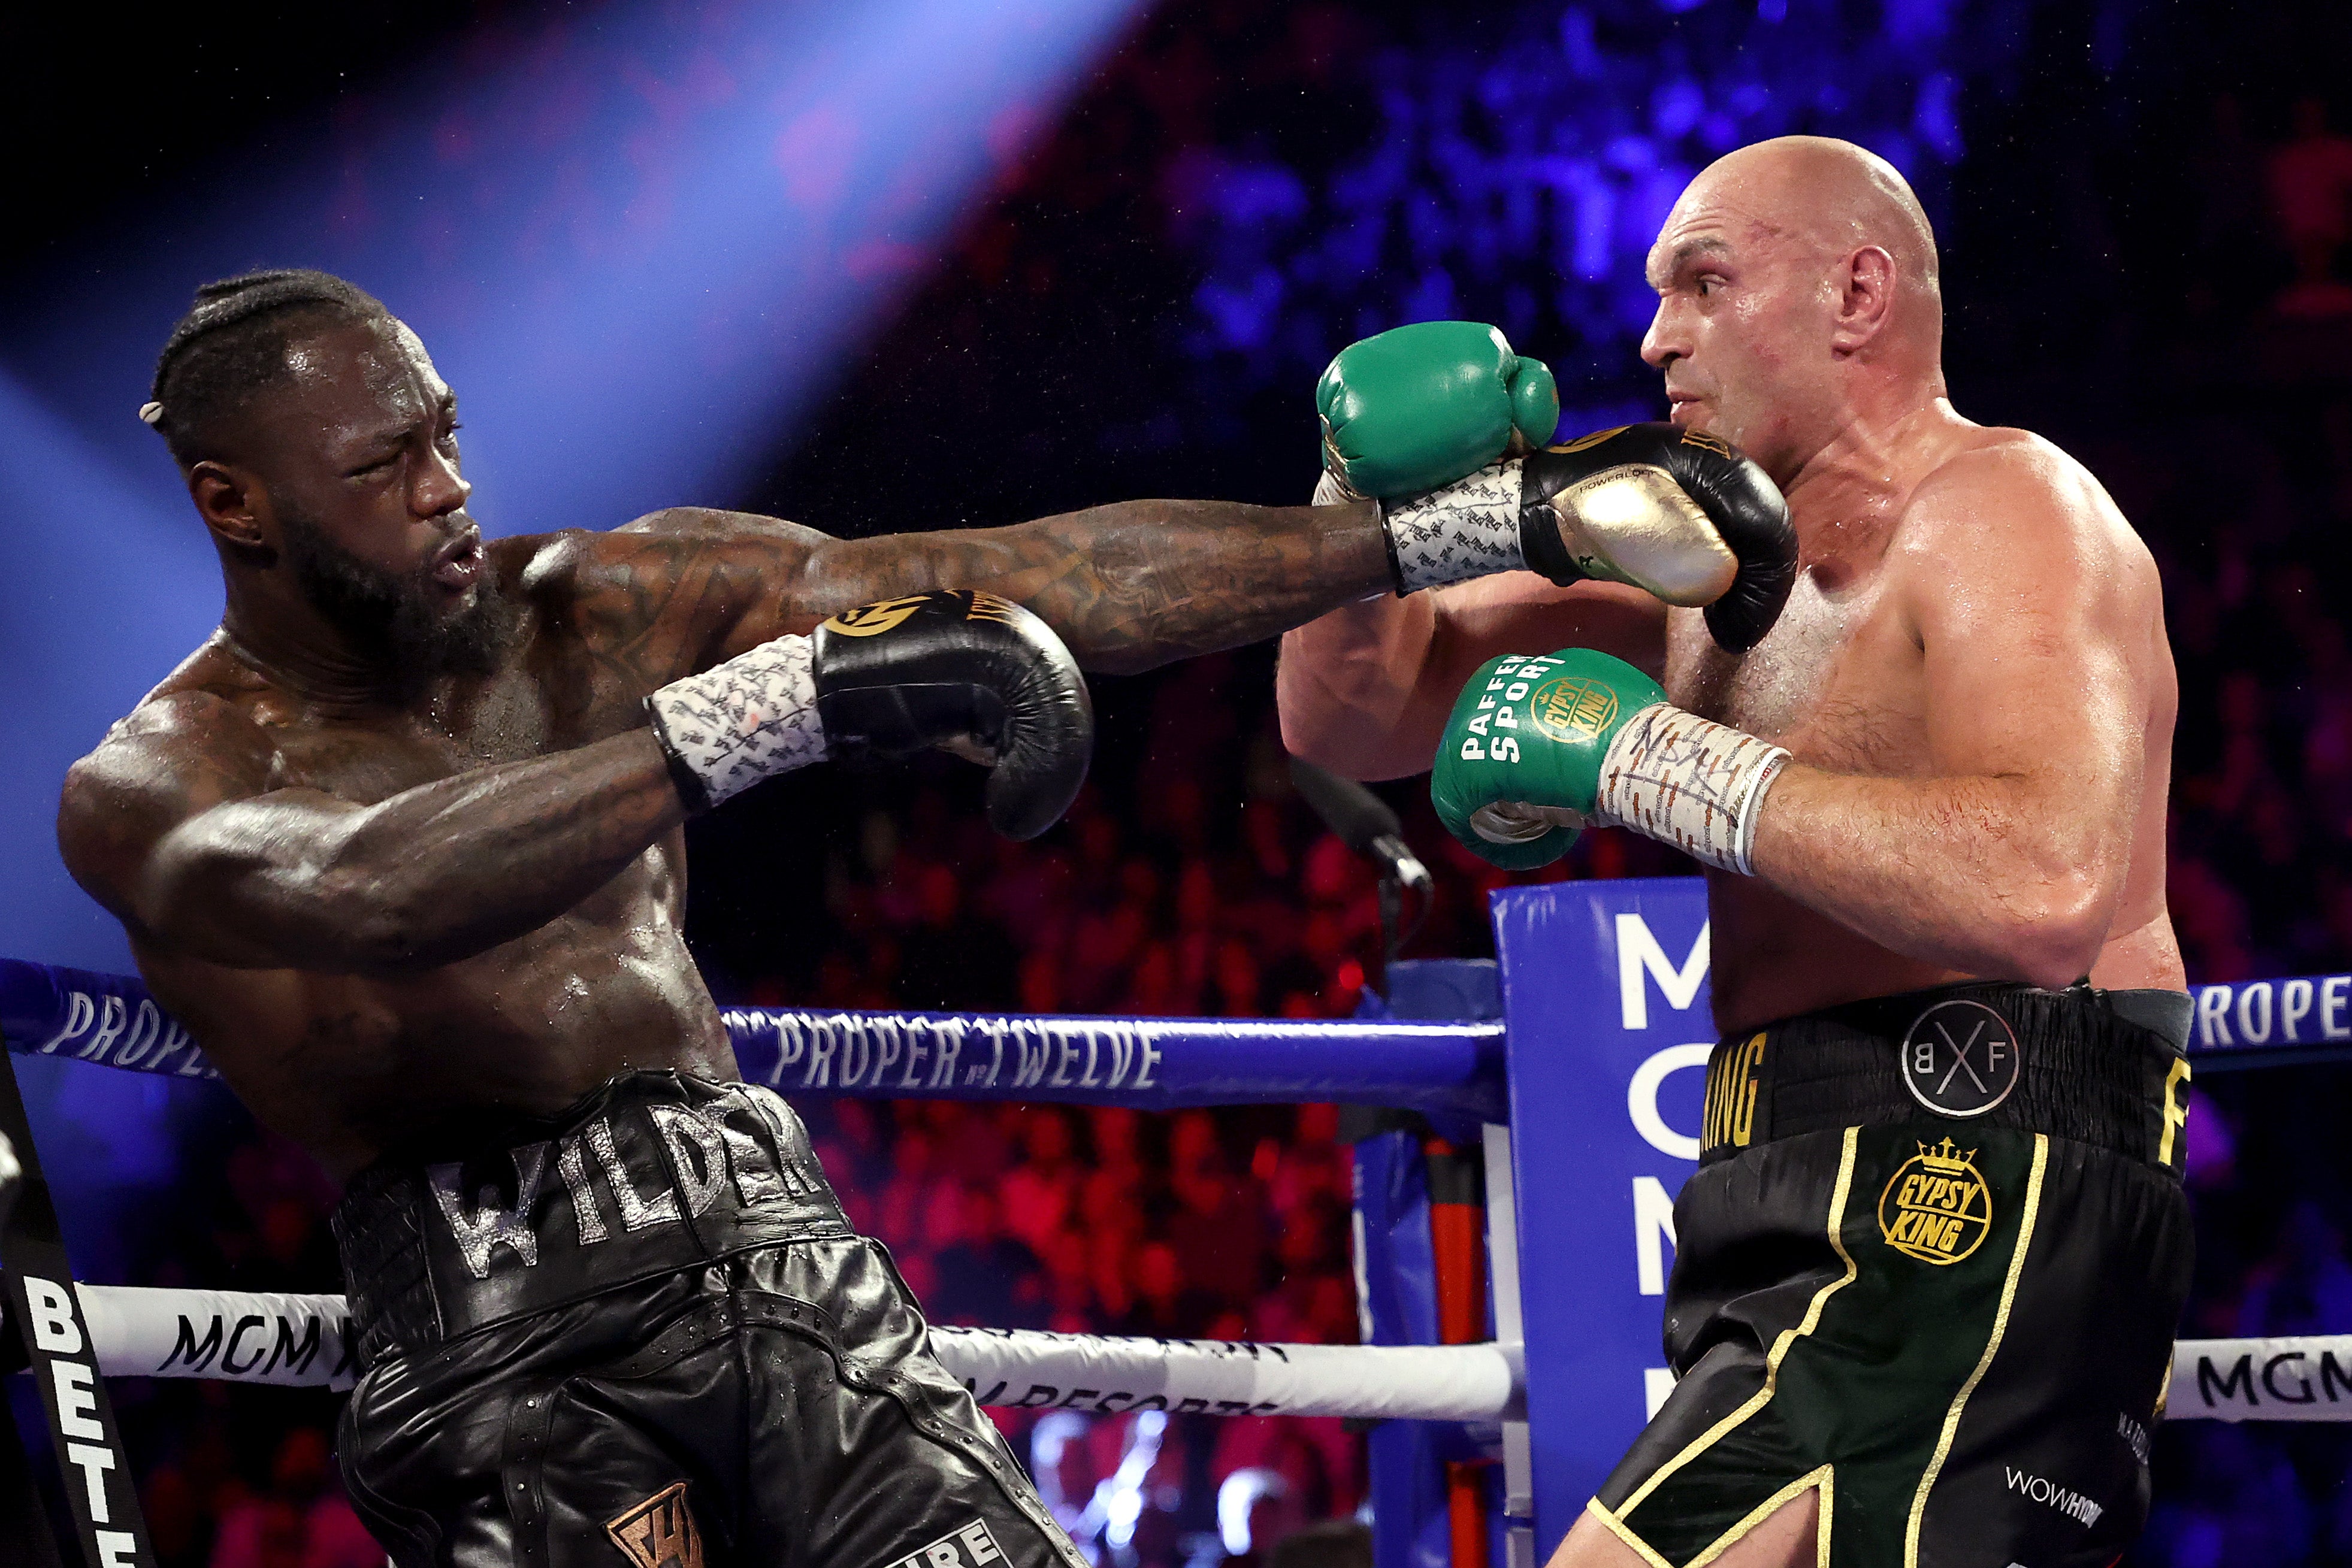 Deontay Wilder was defeated by Tyson Fury in their second heavyweight title fight